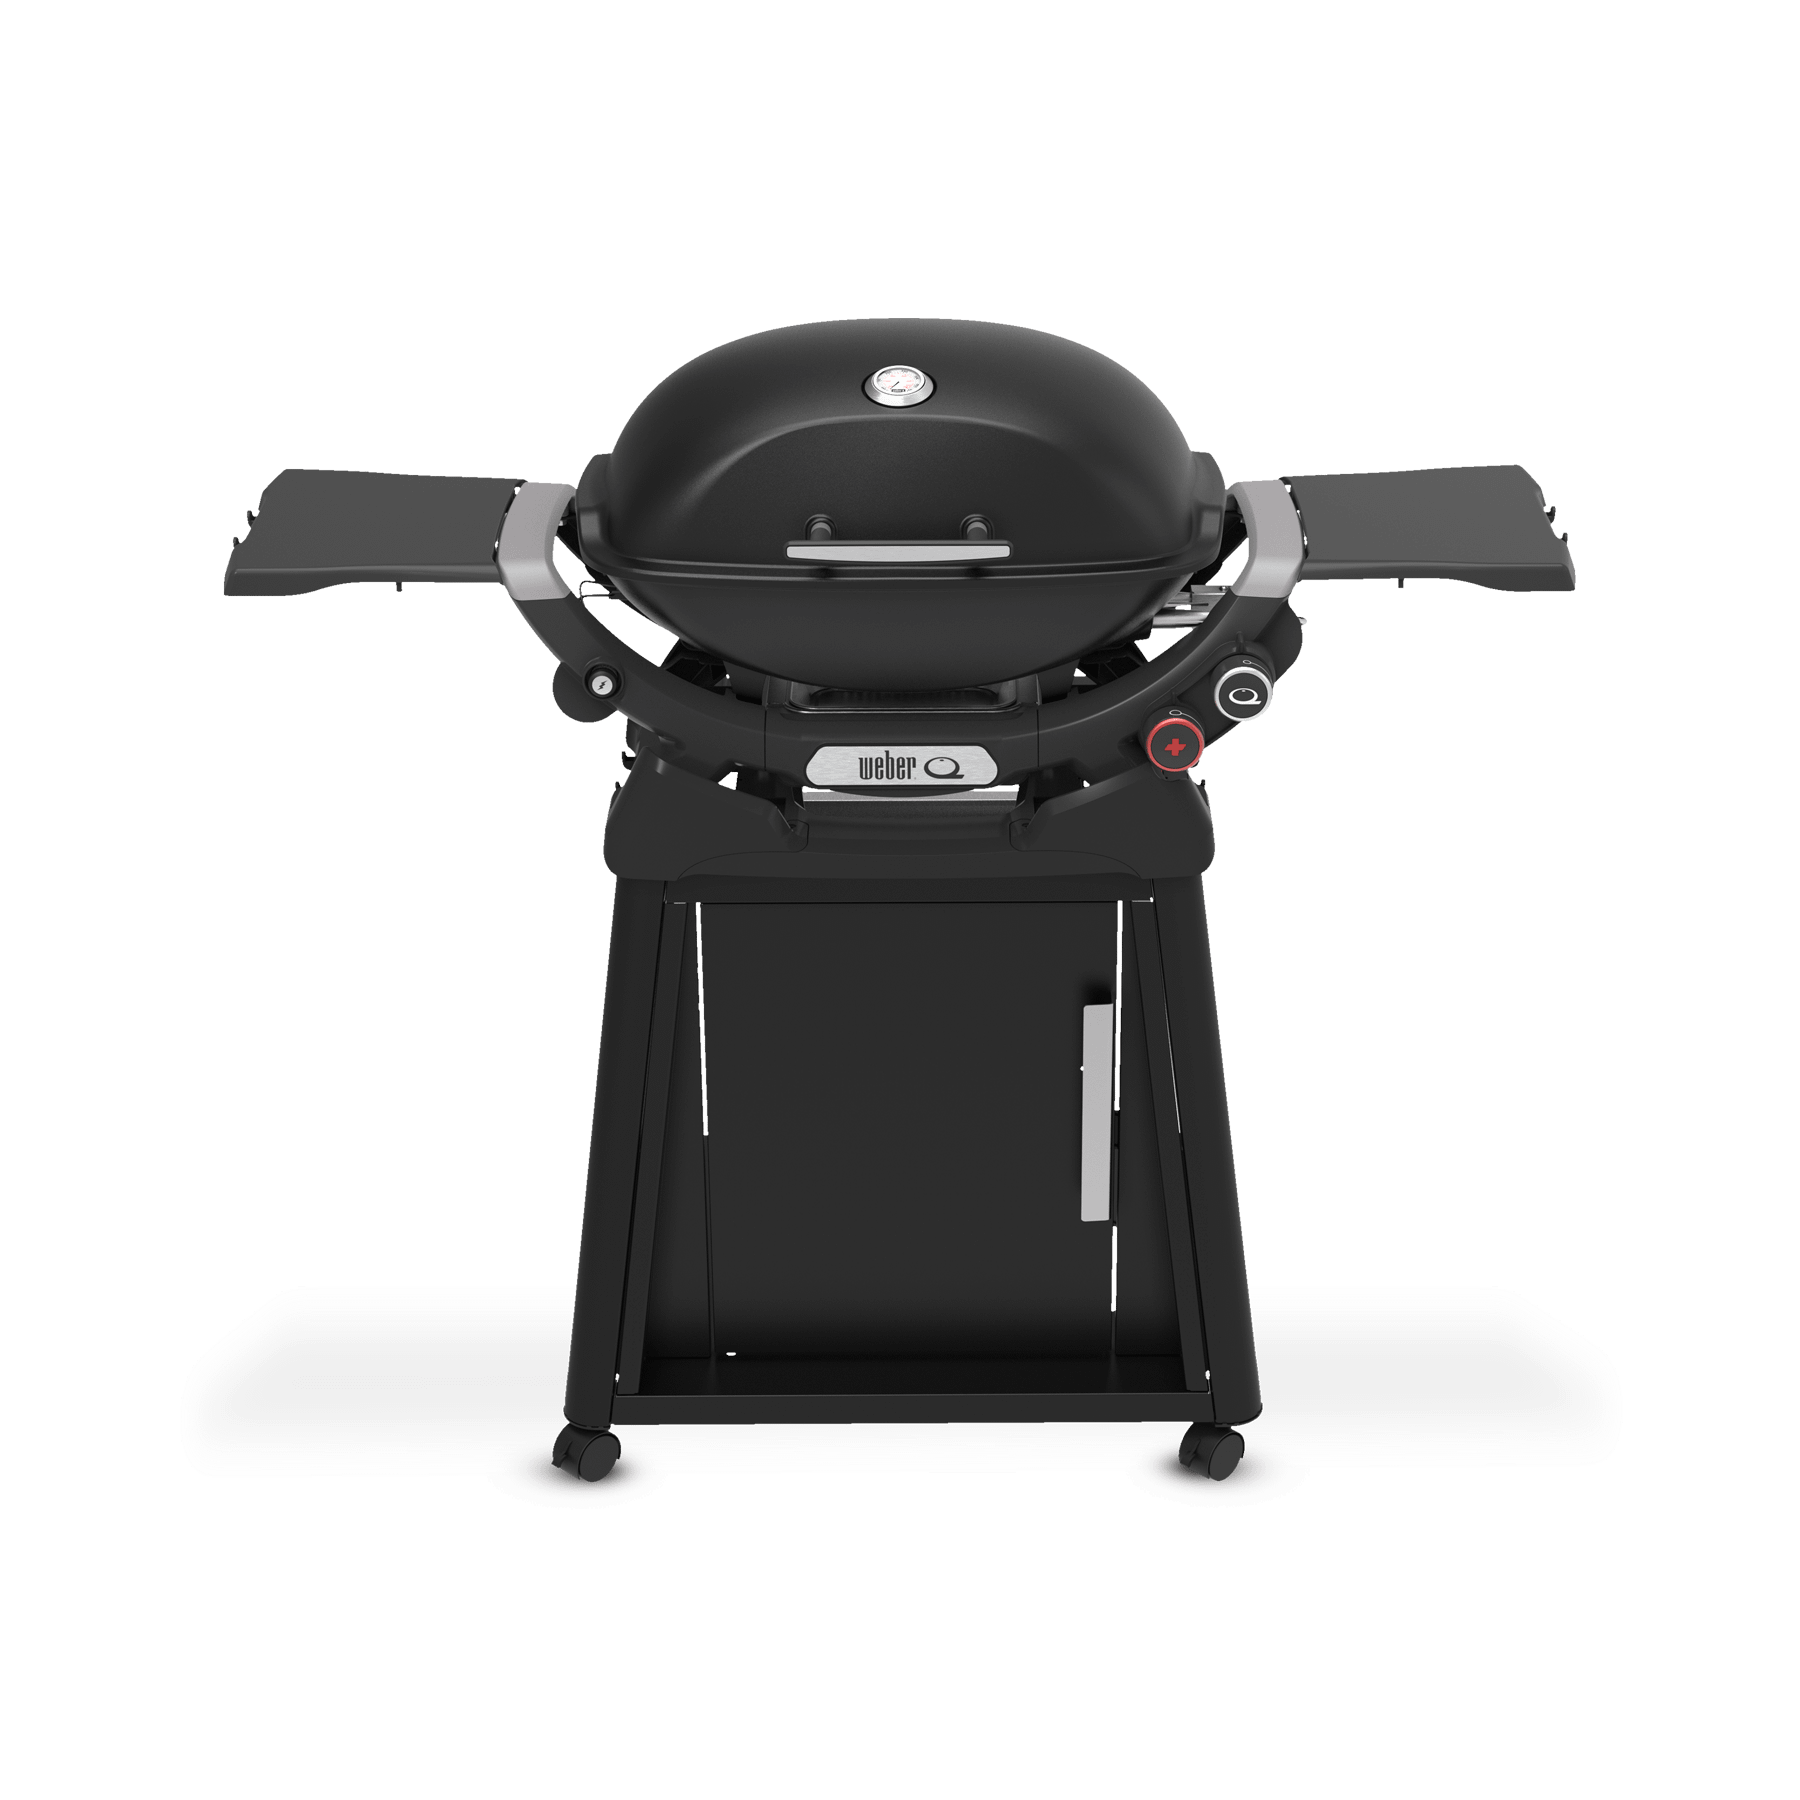 Weber 1500390 Q 2800N+ Gas Grill With Stand (Liquid Propane) - Midnight Black